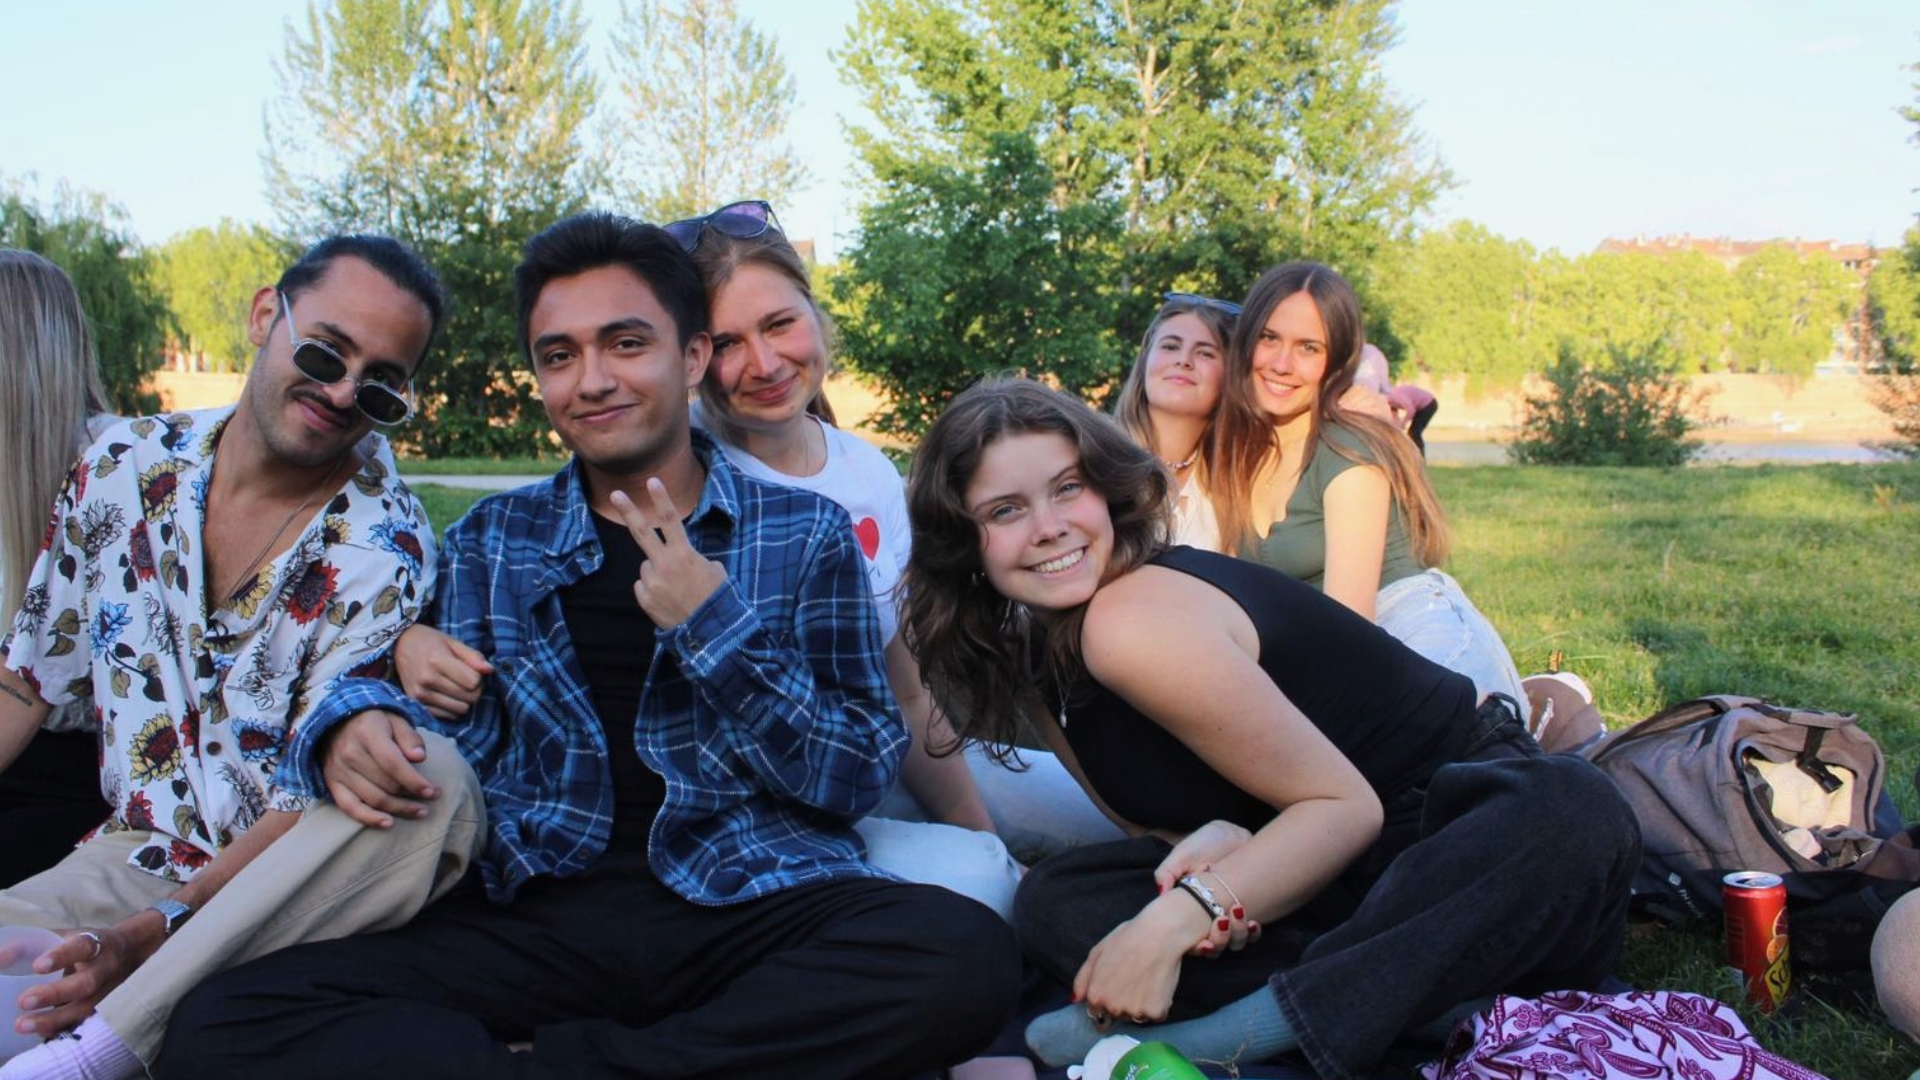 A group of students pose on a blanket while enjoying a picnic.